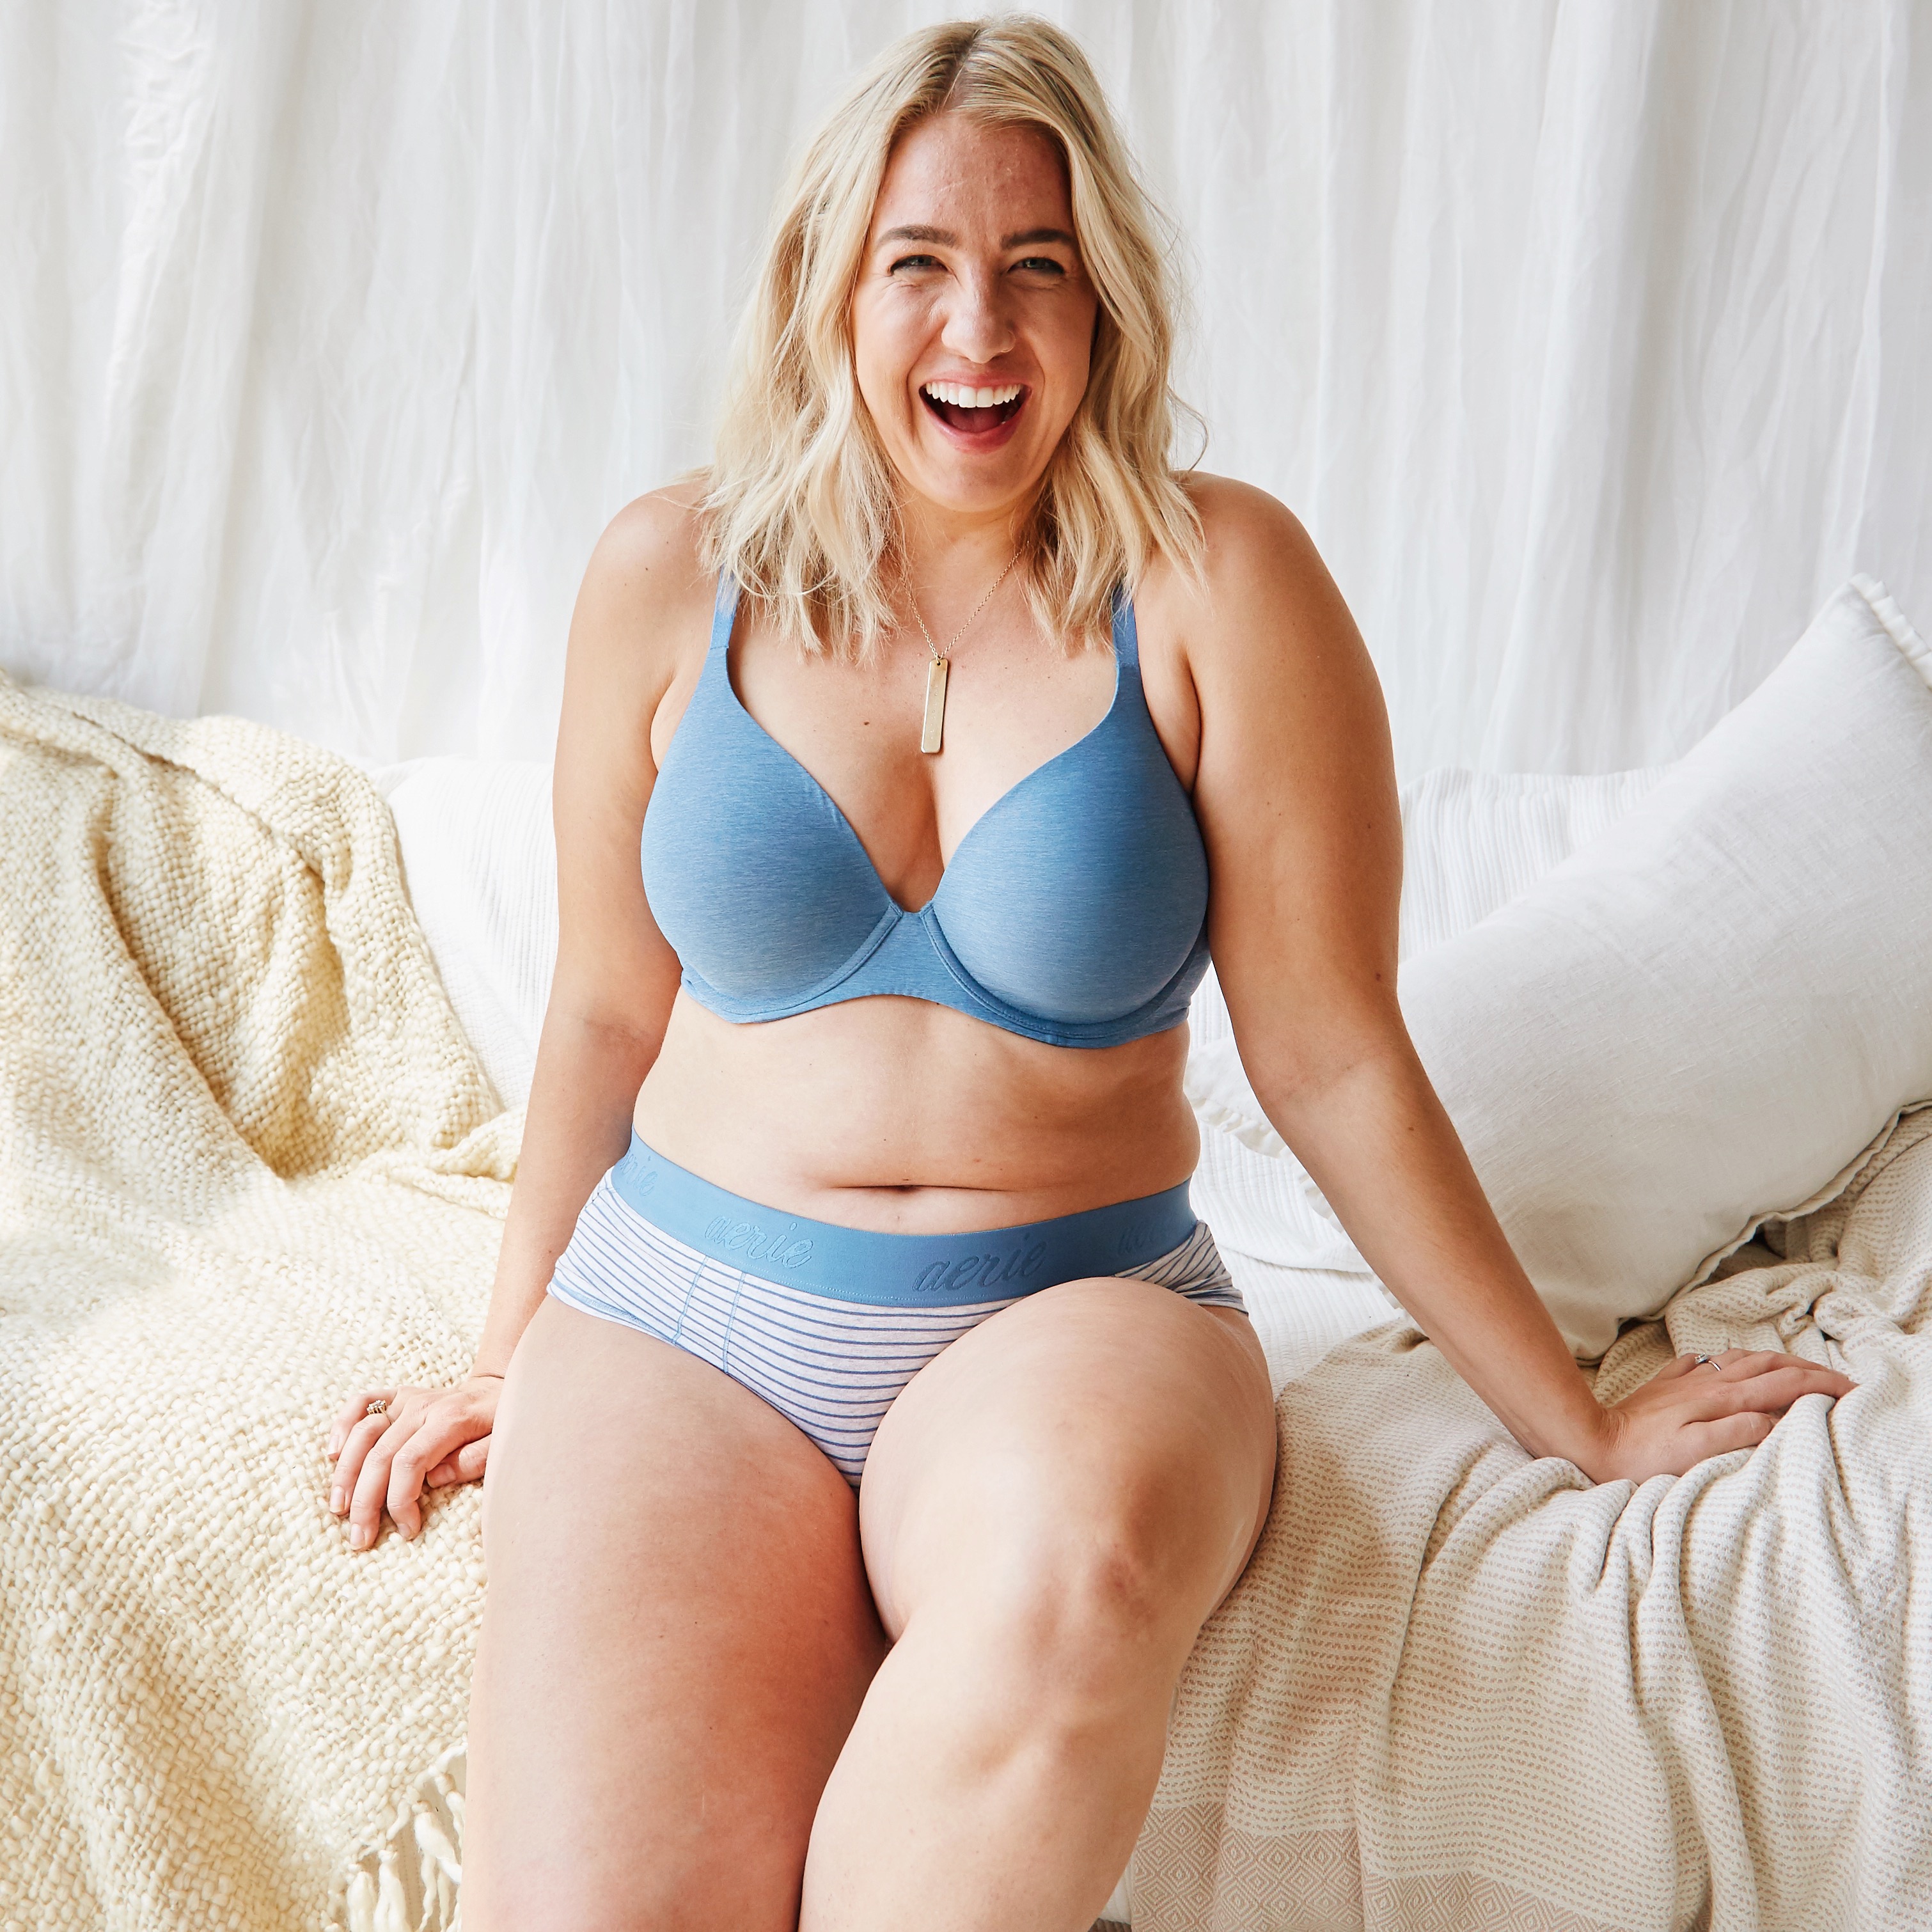 Plus-size mode Iskra Lawrence stars in new unairbrushed Aerie campaign